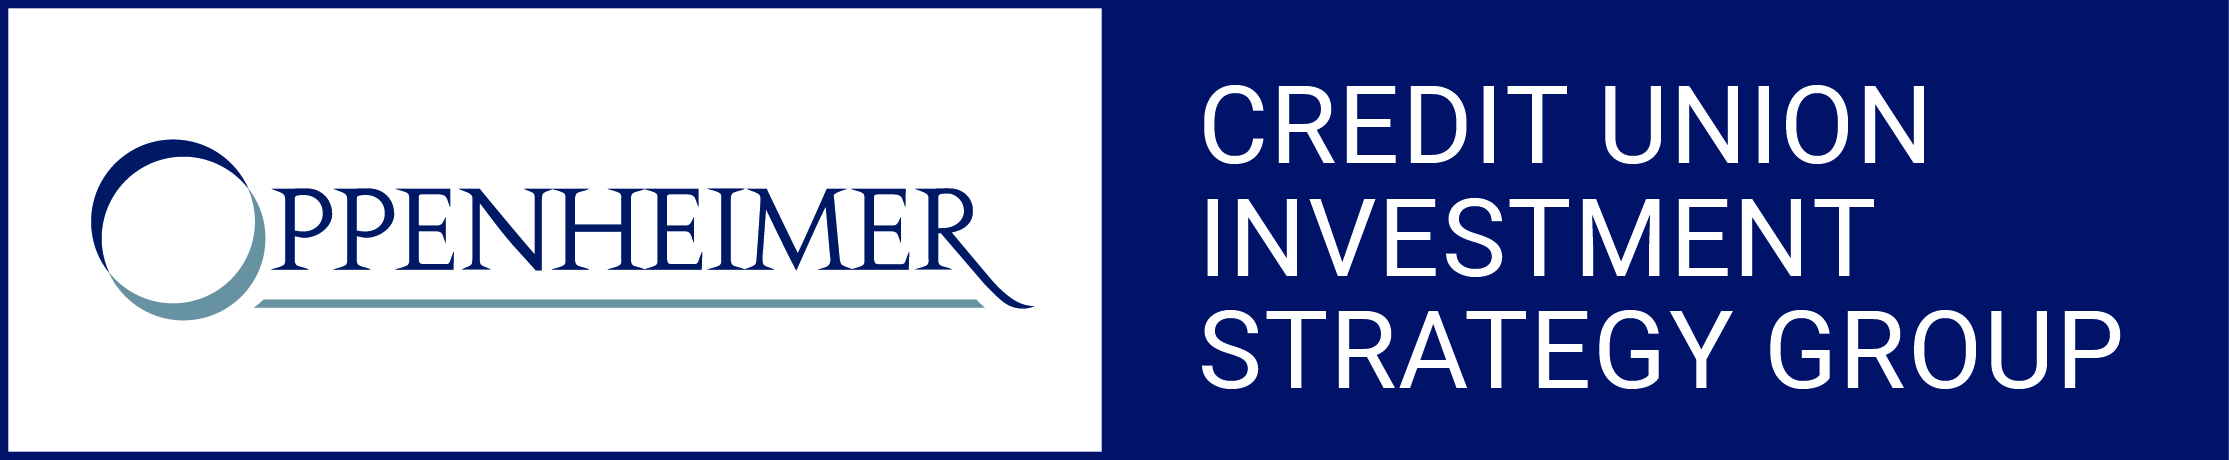 Credit Union Investment Strategy Group logo